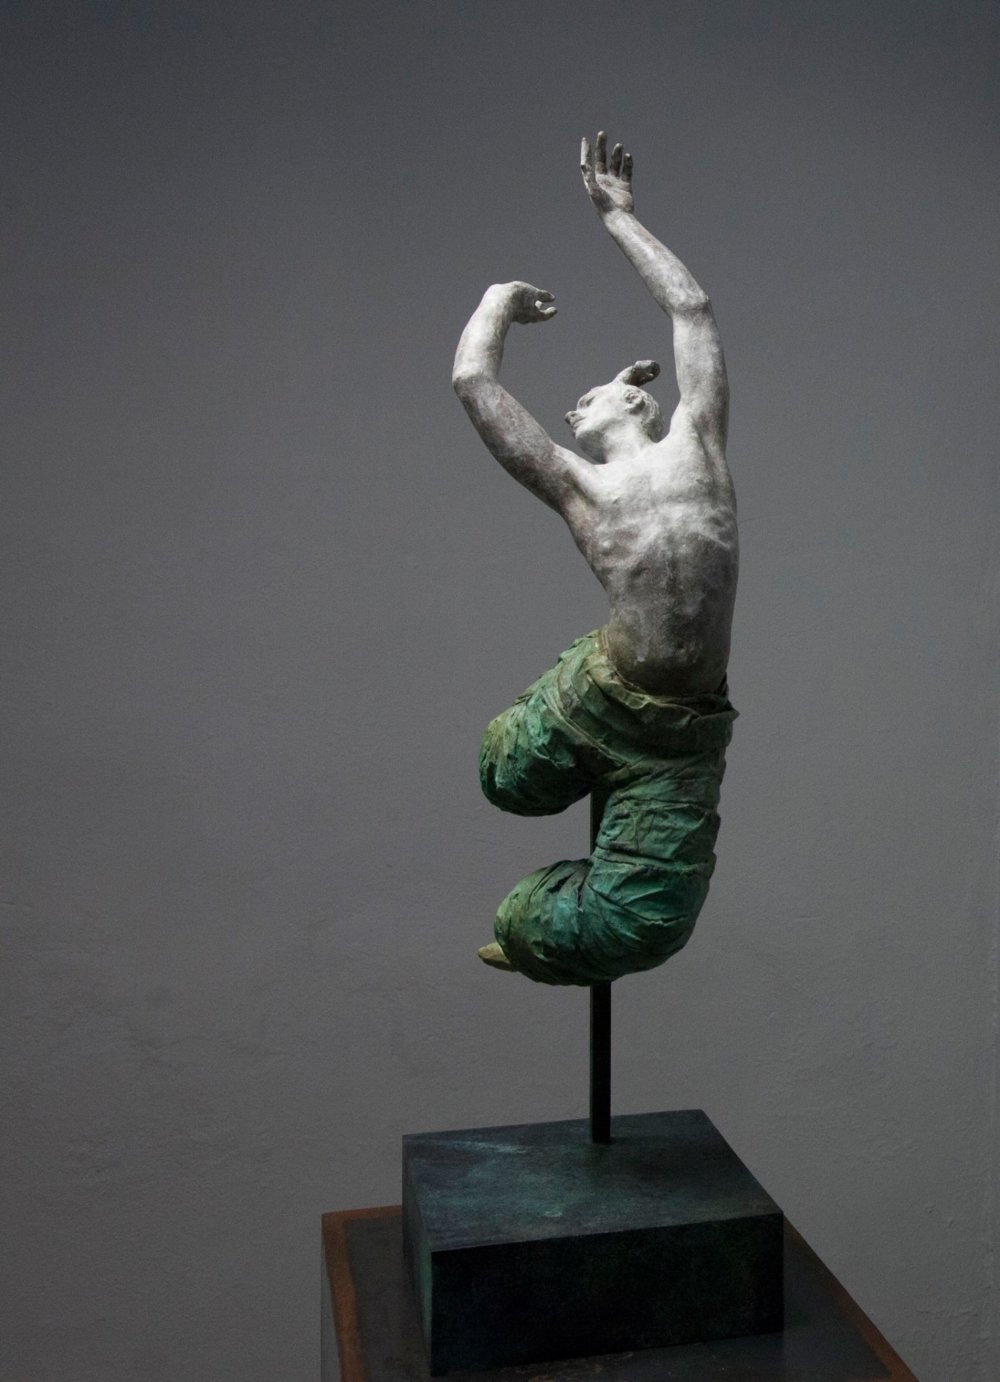 Emotions In Bronze Figurative Sculptures Of The Beauty Of The Human Body In Motion By Coderch Malavia Aka Joan Coderch And Javier Malavia 15